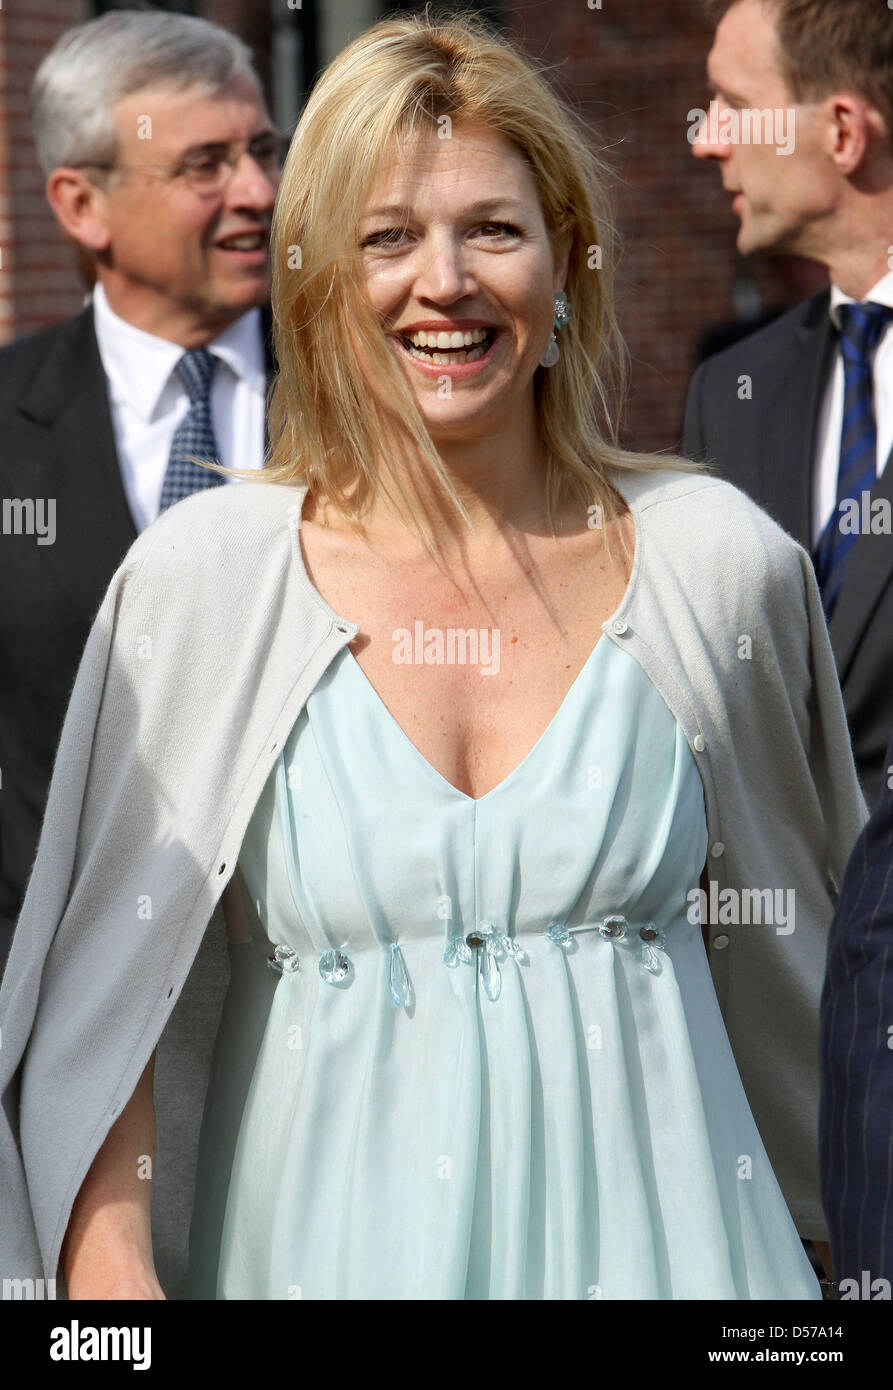 Dutch Princess Maxima attends the 50th anniversary celebration of the foundation of Duivenvoorde Castle in Voorschoten, the Netherlands, 28 April 2010. Photo: Albert Nieboer (NETHERLANDS OUT) Stock Photo